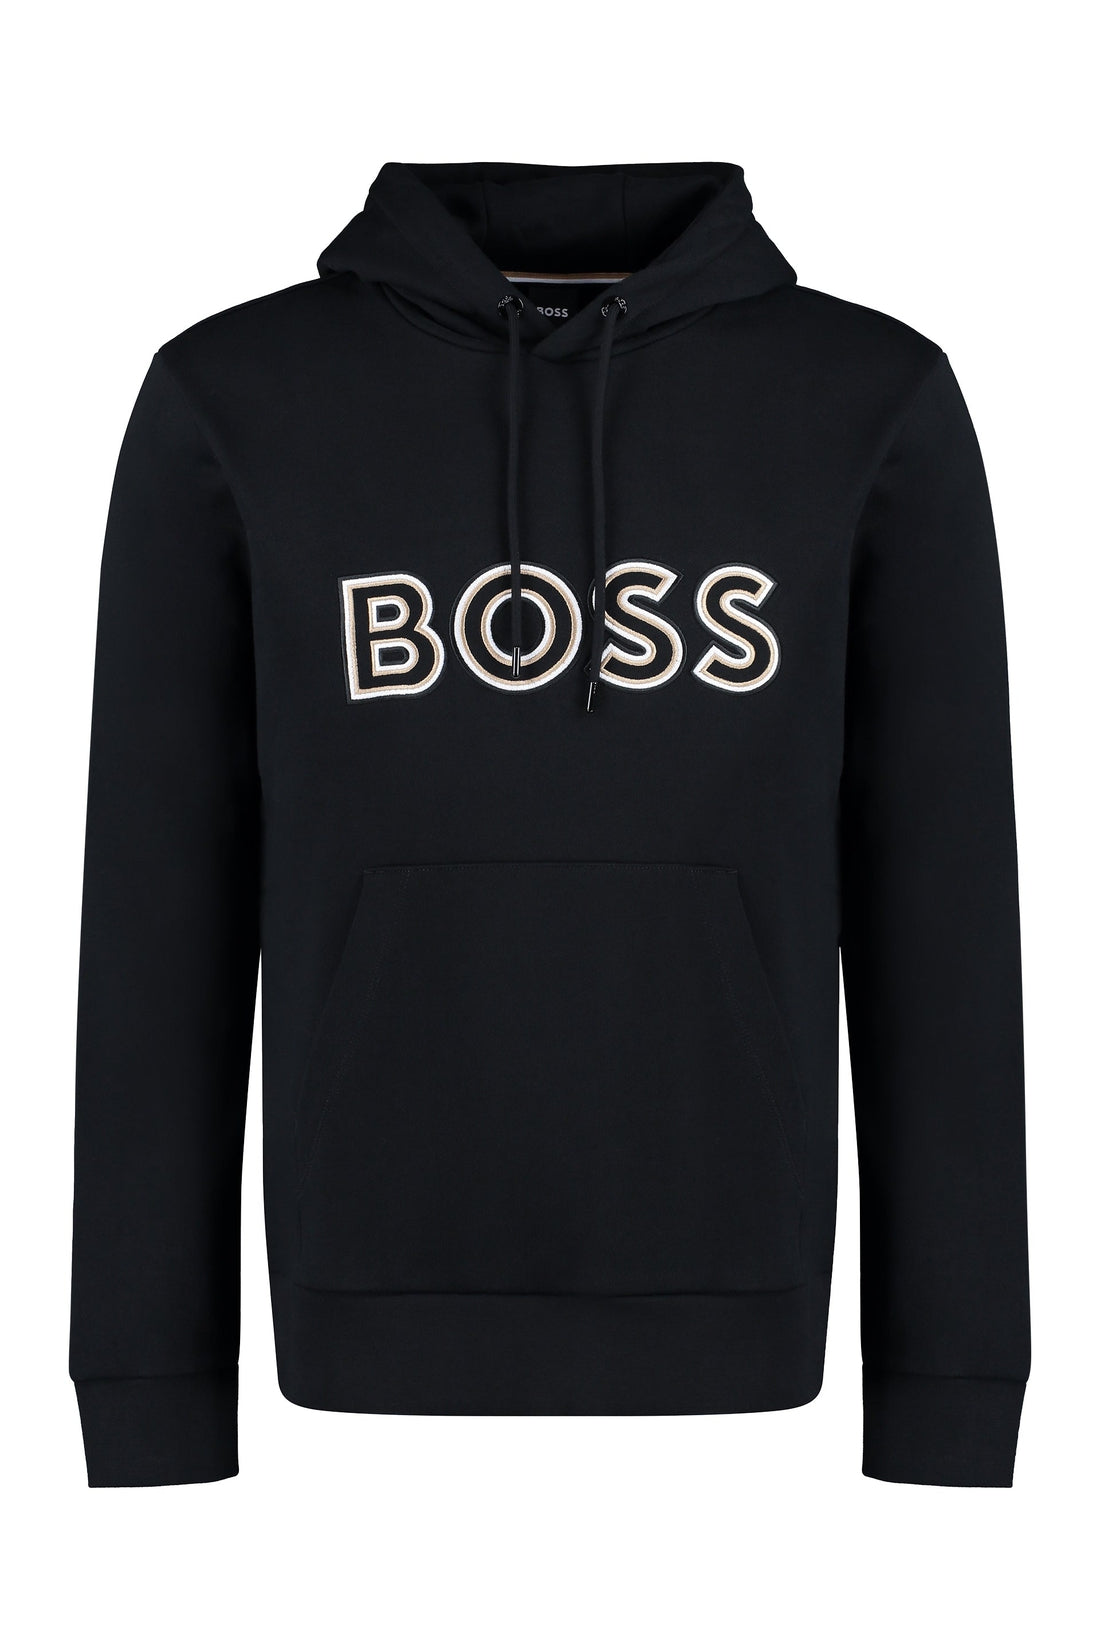 BOSS-OUTLET-SALE-Embroidered hoodie-ARCHIVIST